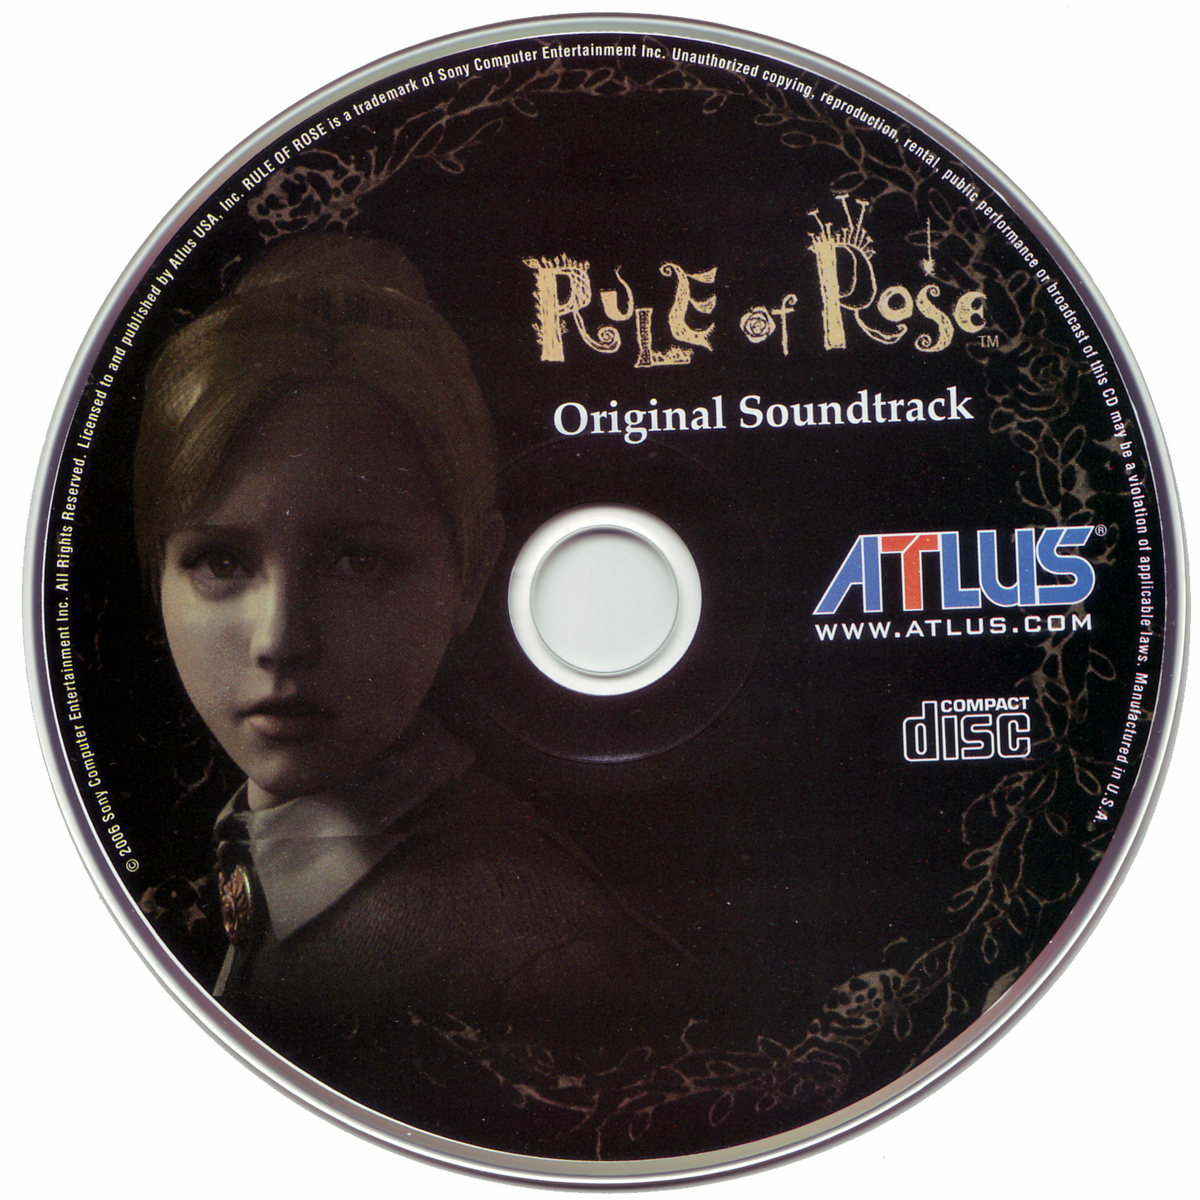 Rule of Rose - Songs from the Original Soundtrack (2006) MP3 